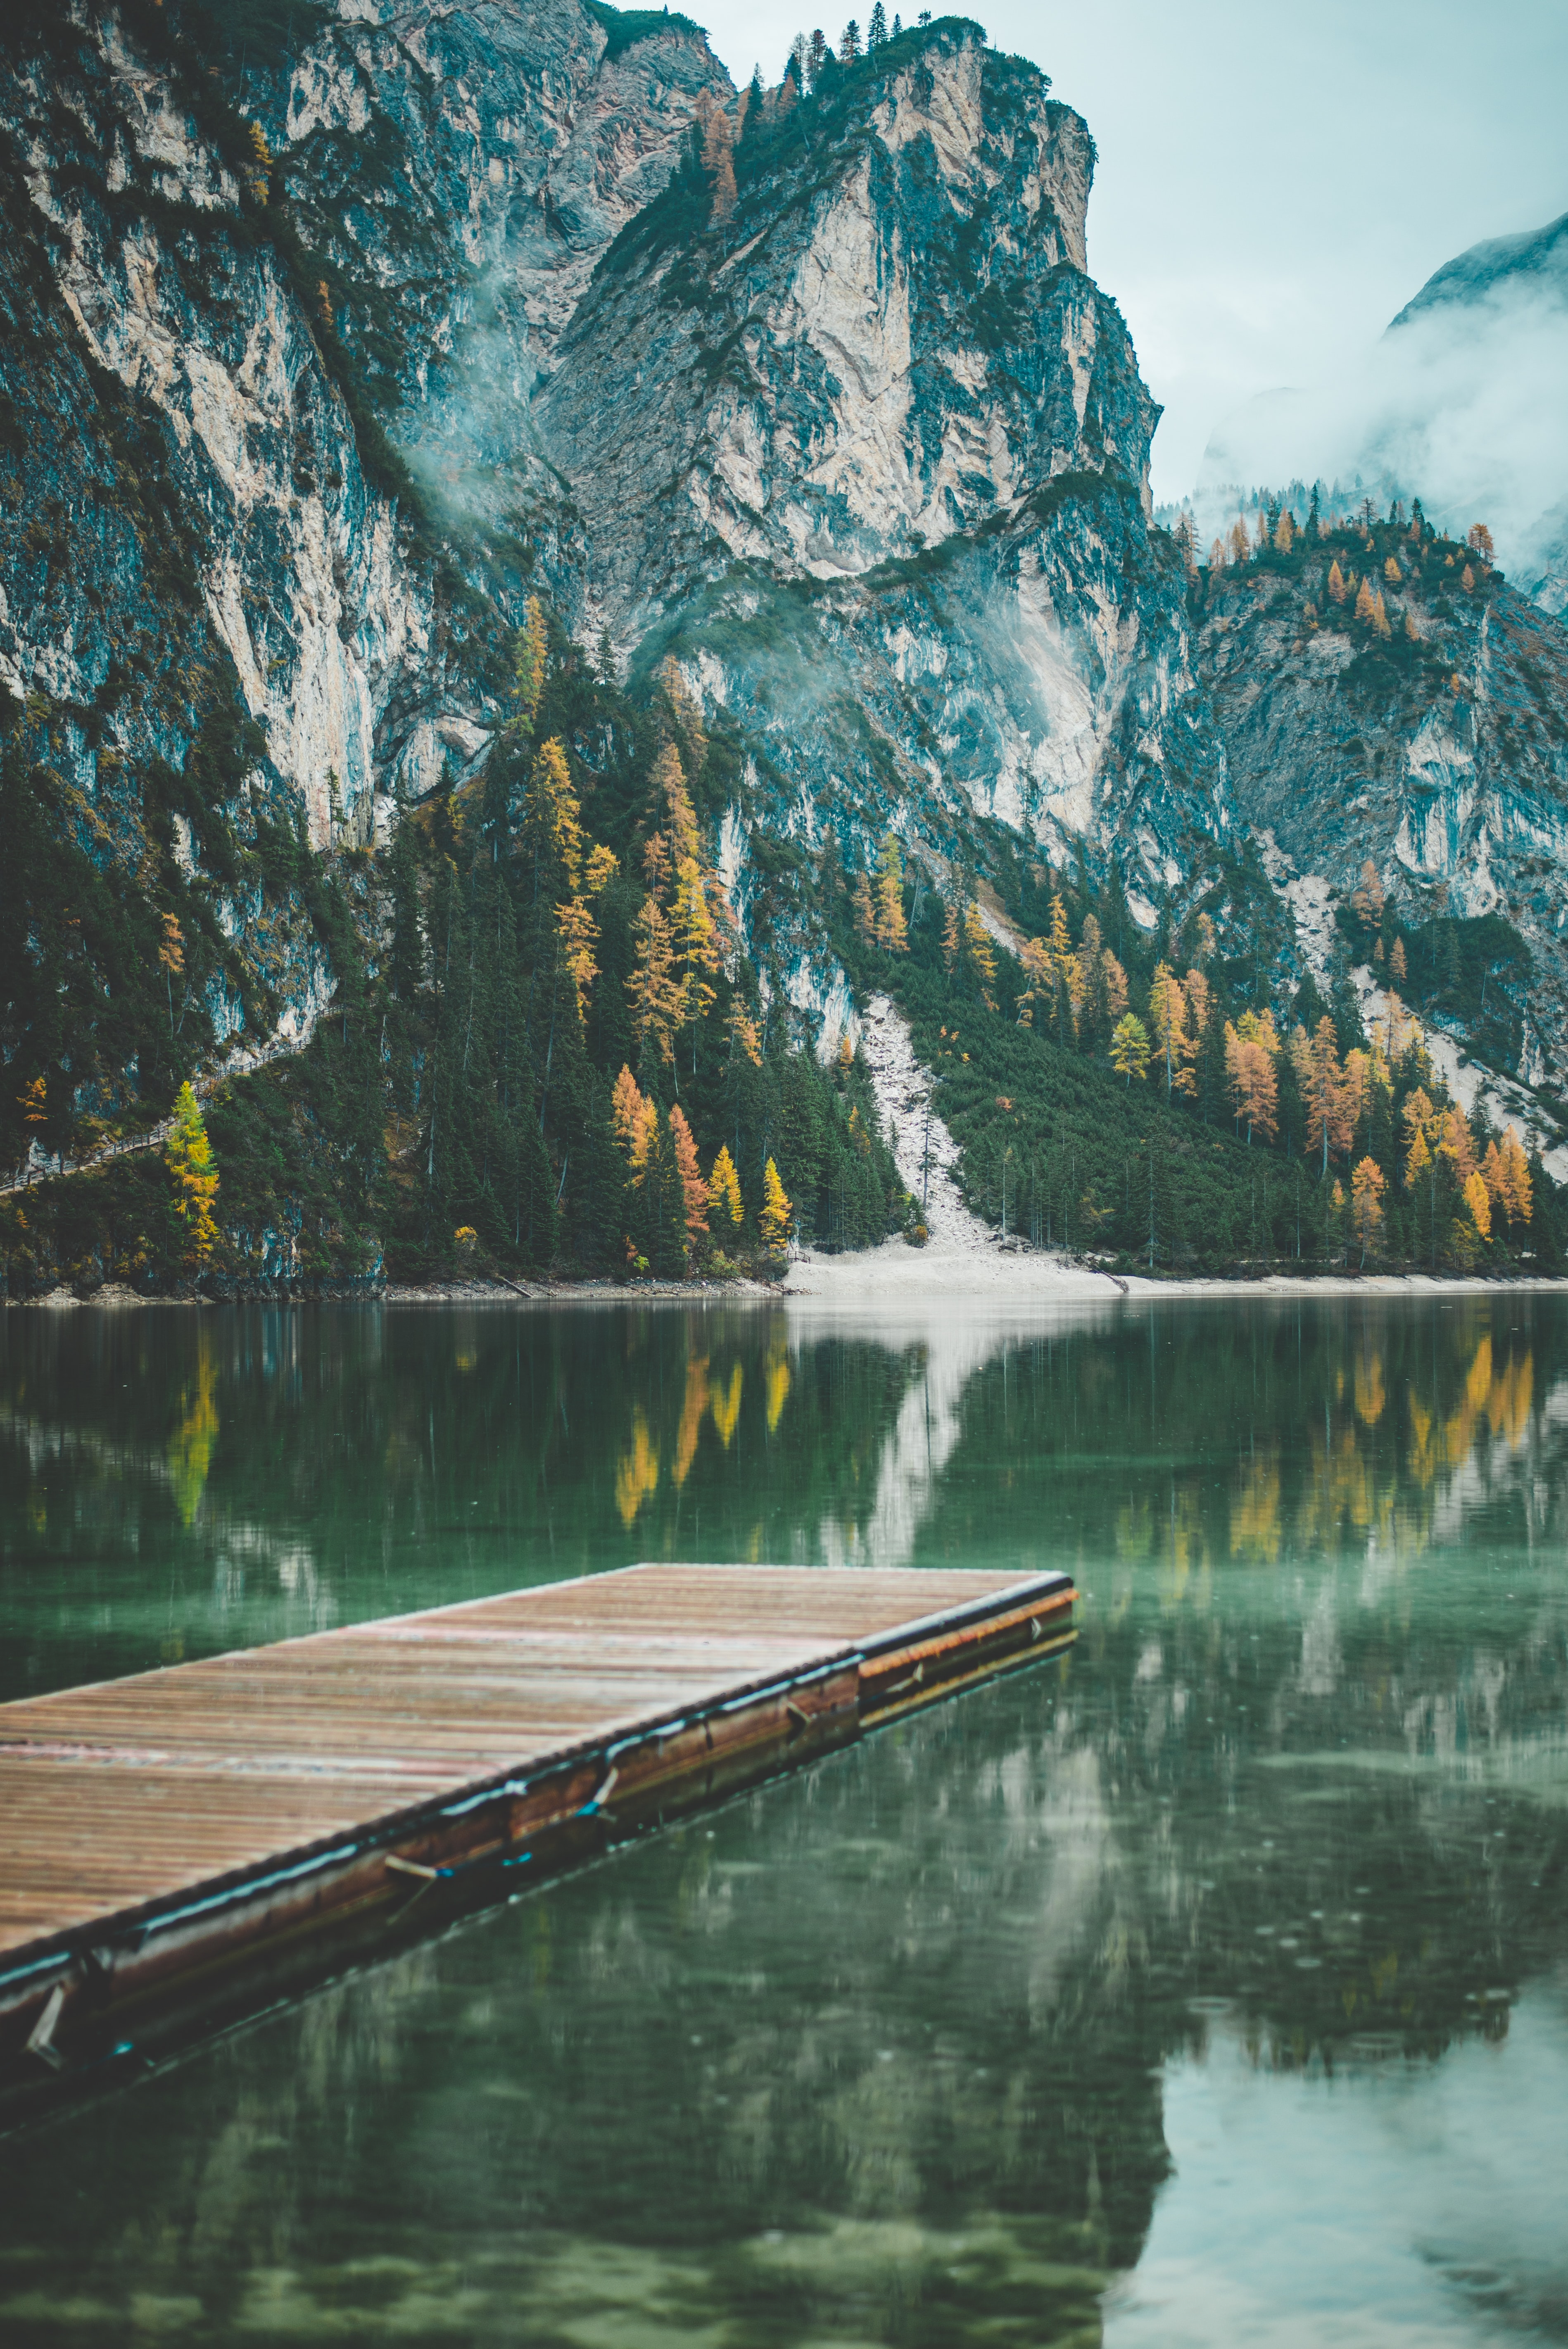 italy, mountains, pier, nature, trees, lake, reflection Full HD